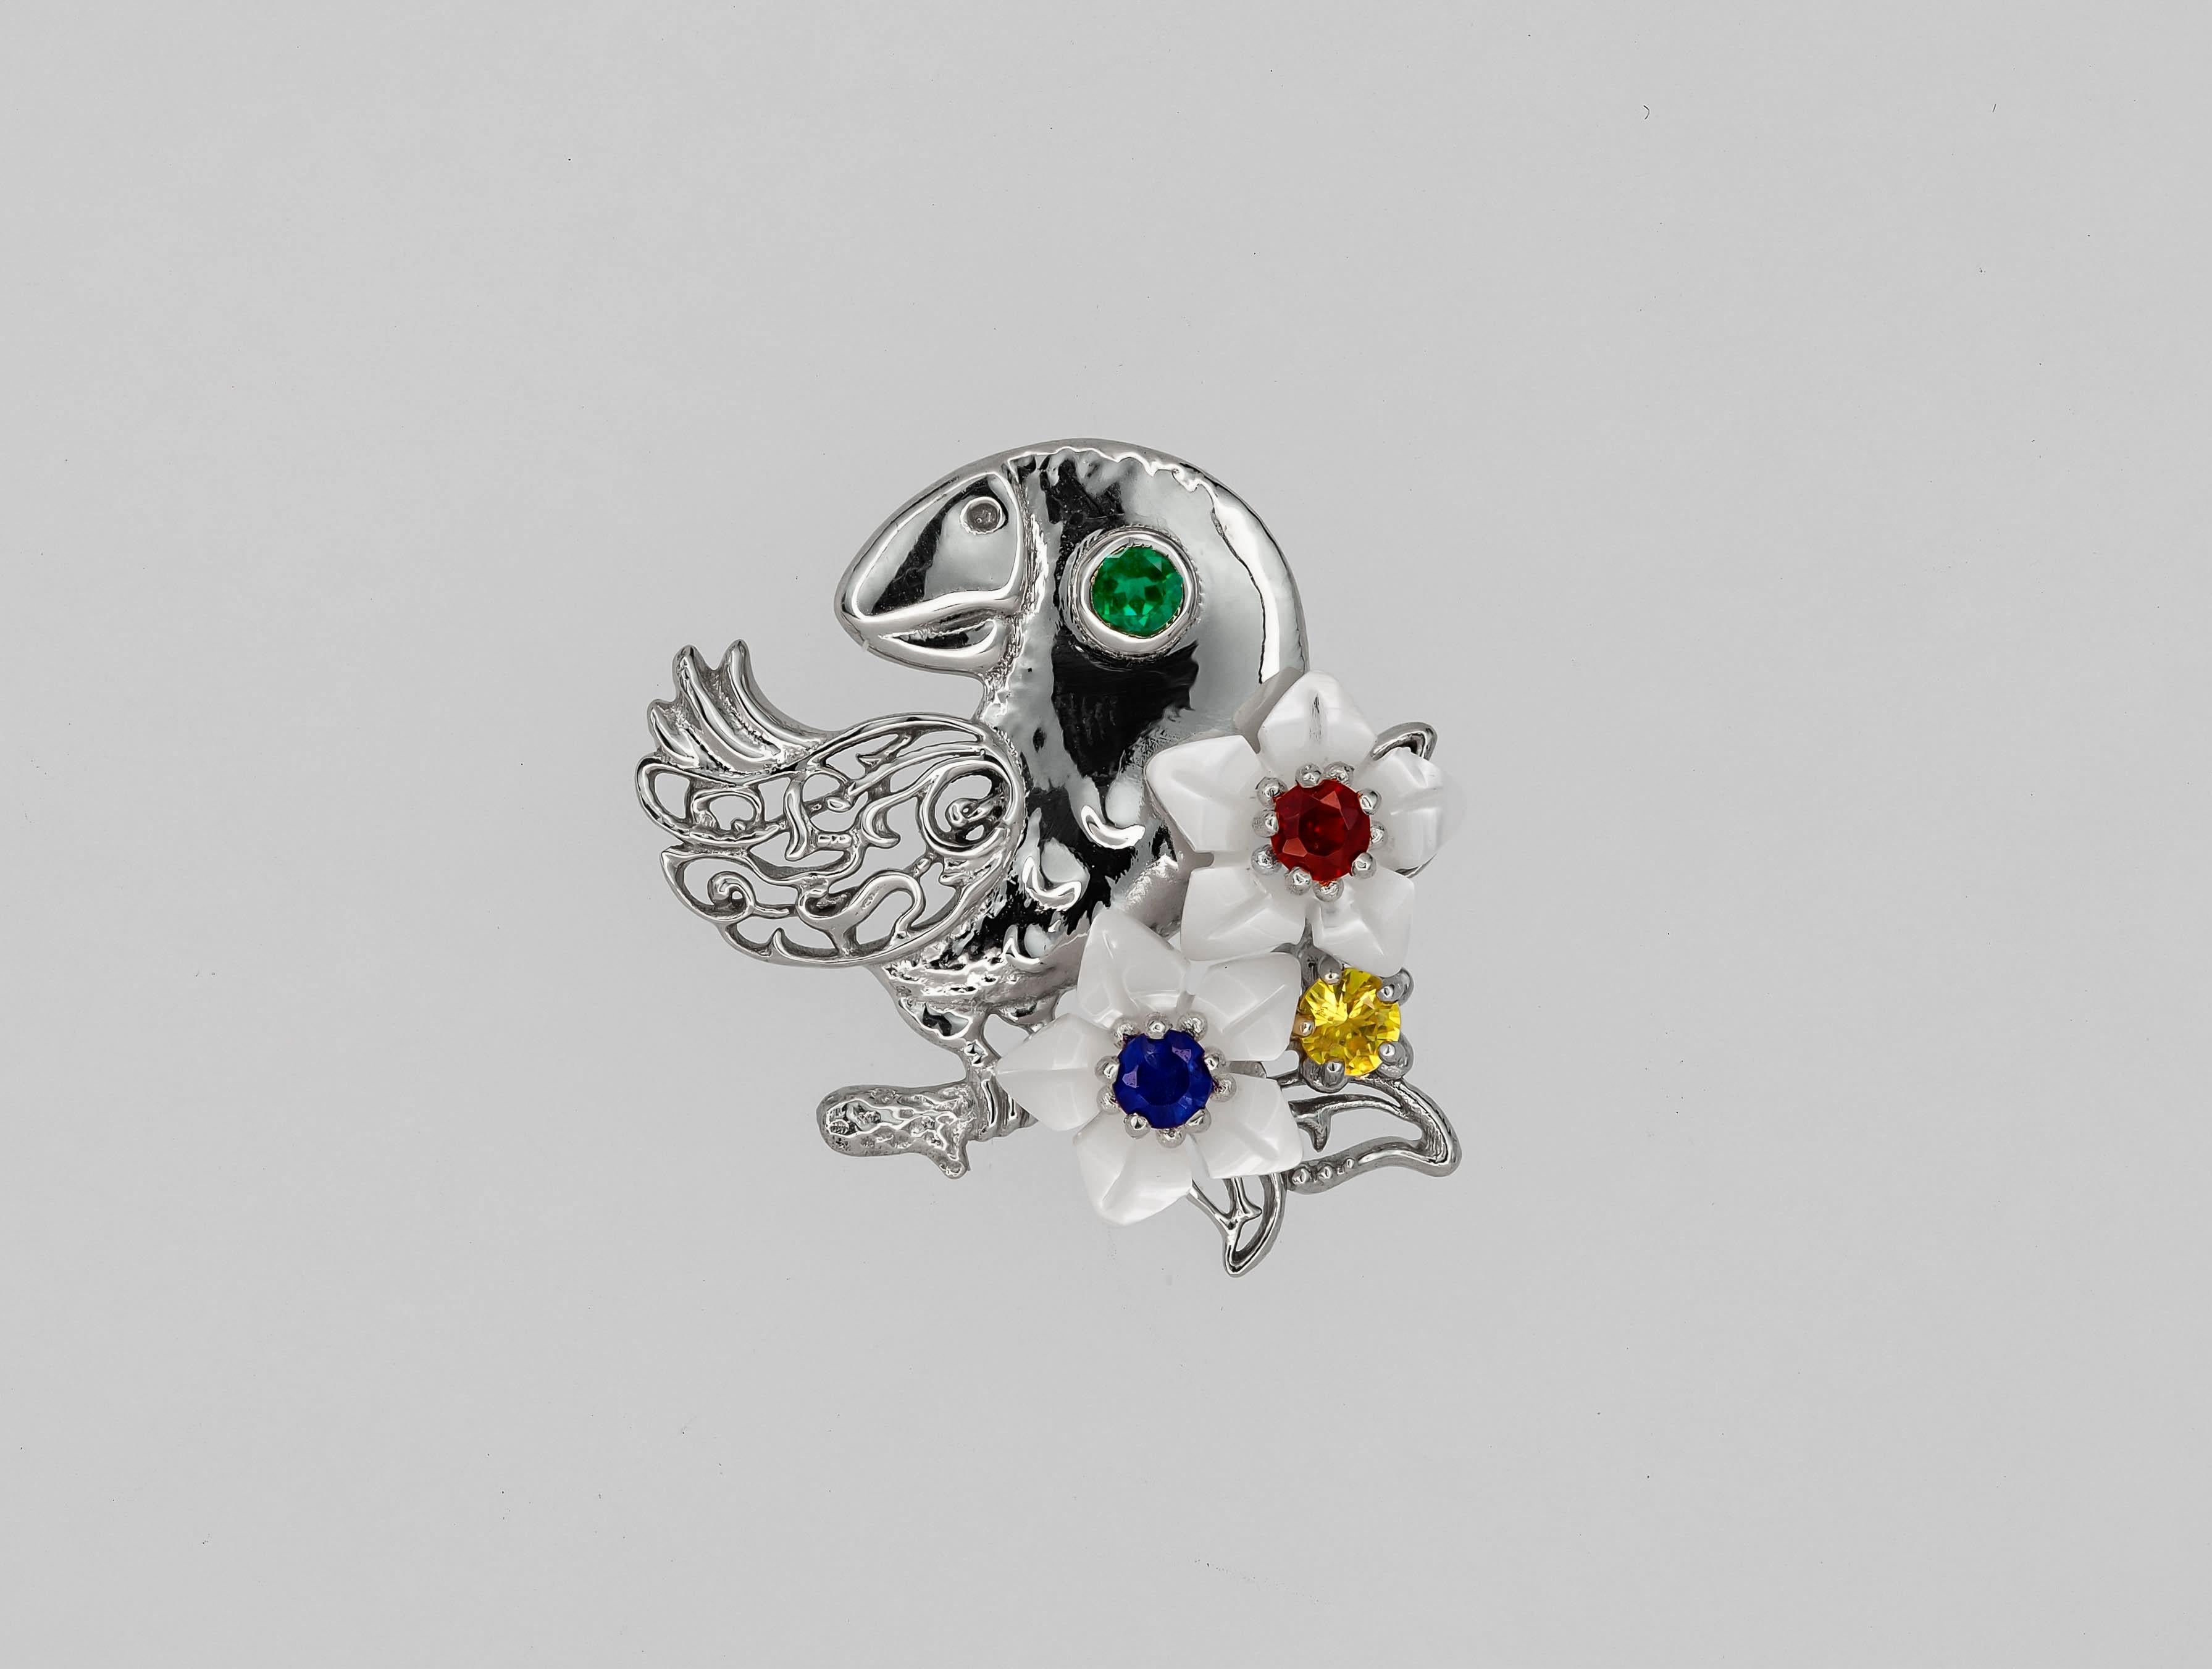 Round Cut Parrot Gold Pendant with Emerald, Sapphires, Ruby and Pearl Carved Flowers For Sale